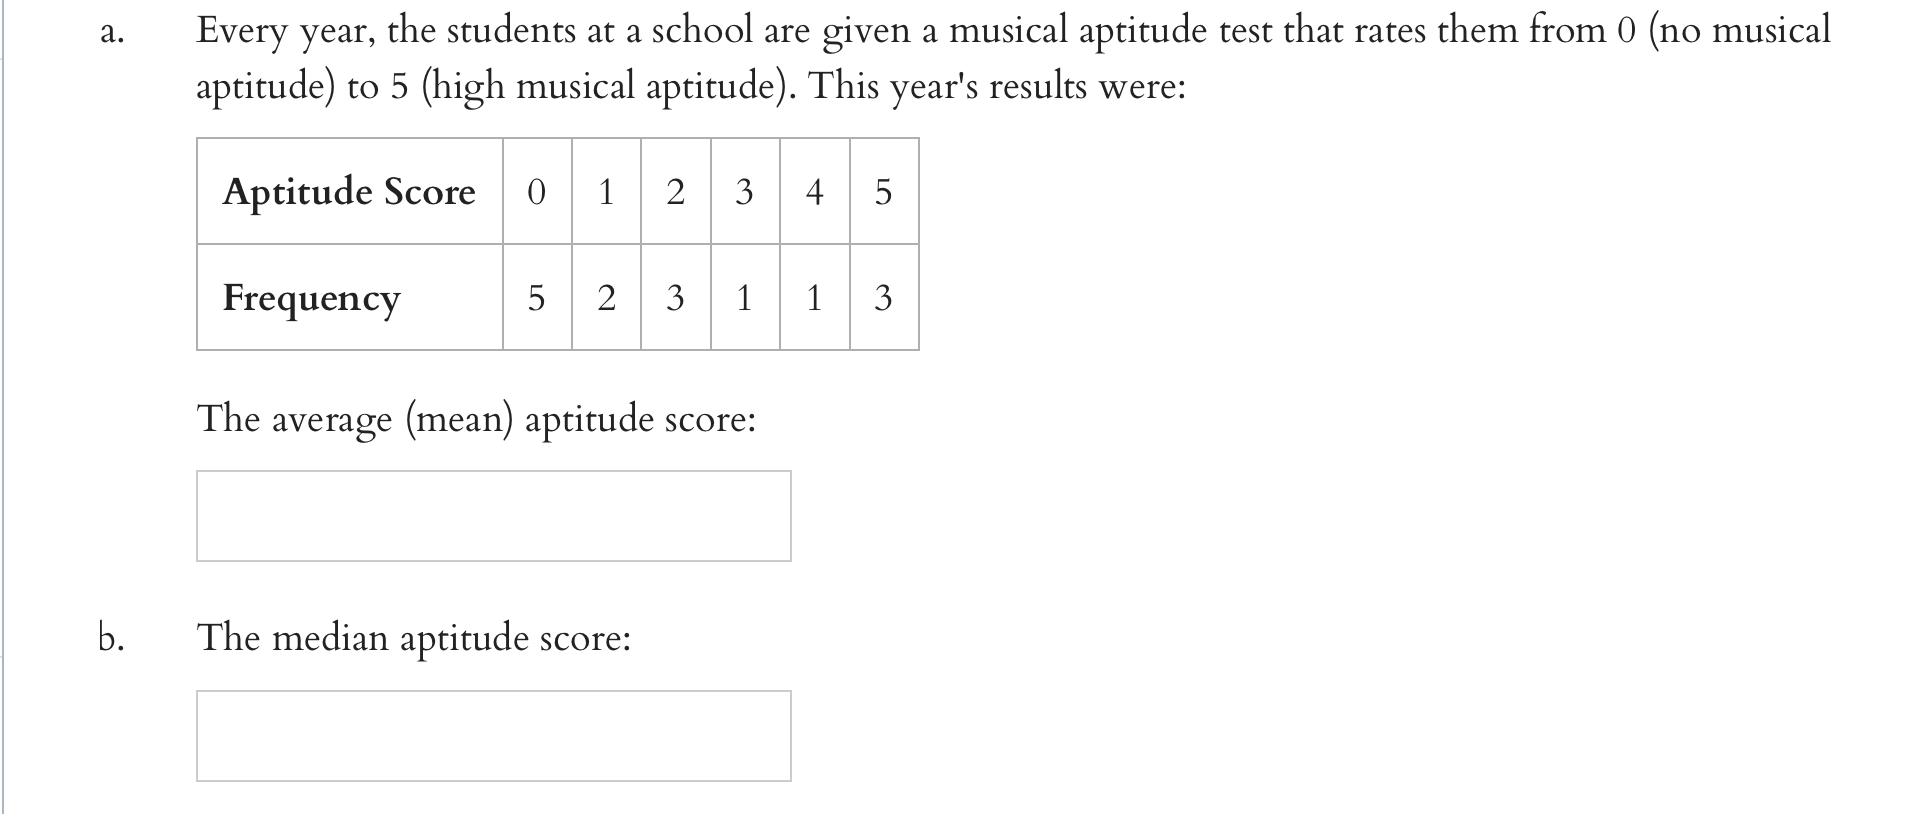 A Every Year The Students At A School Are Given A Musical Aptitude Test That Rates Them From 0